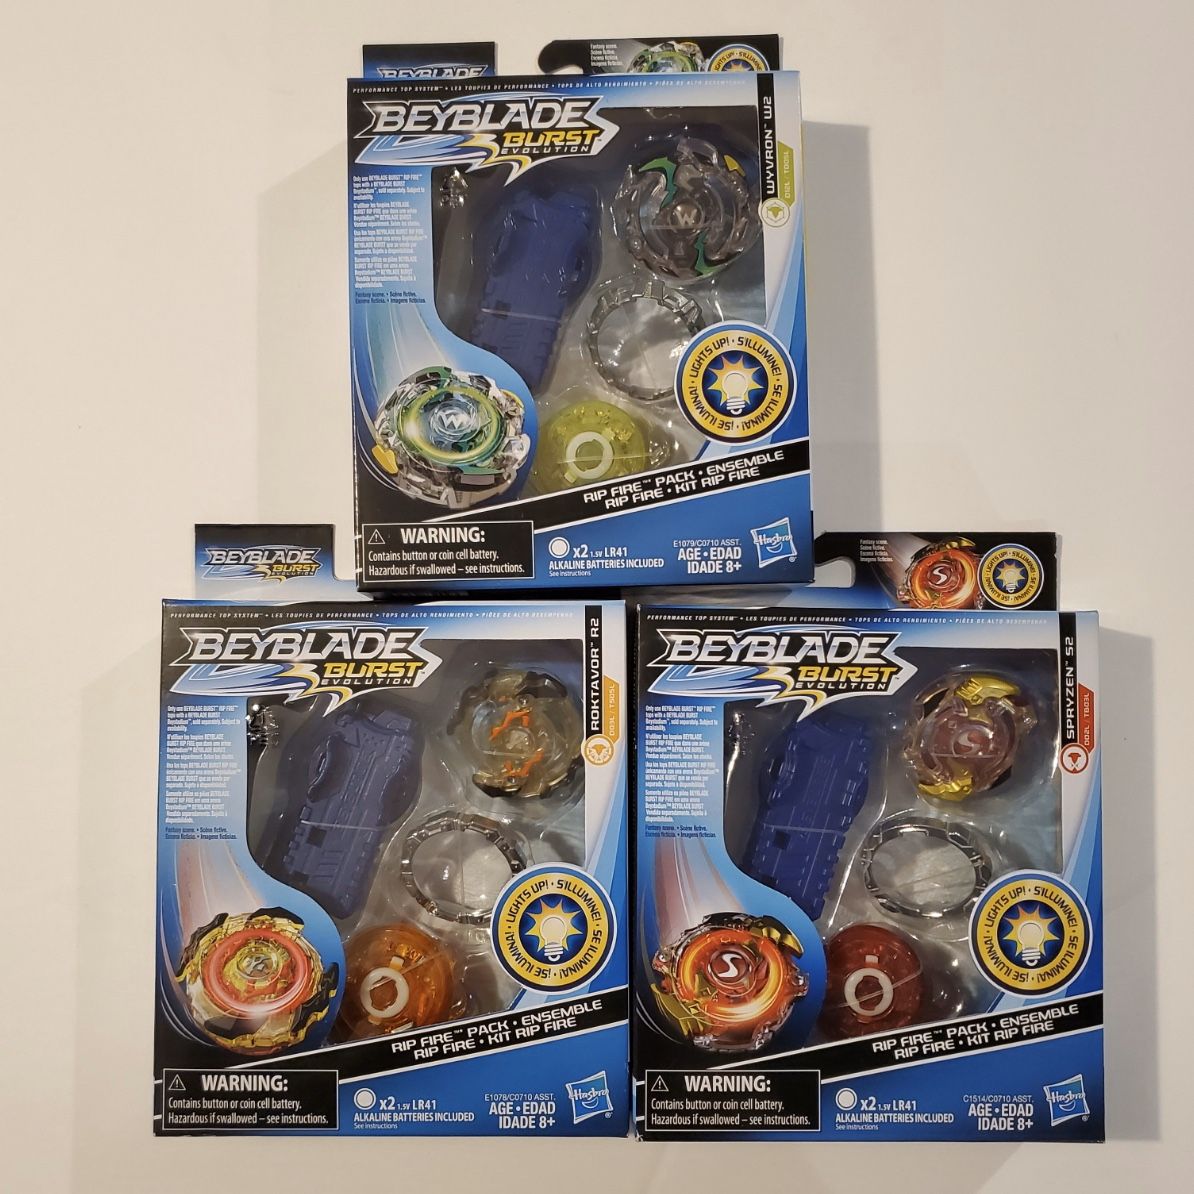 Beyblade Burst RipFire Lot of 3 different colors